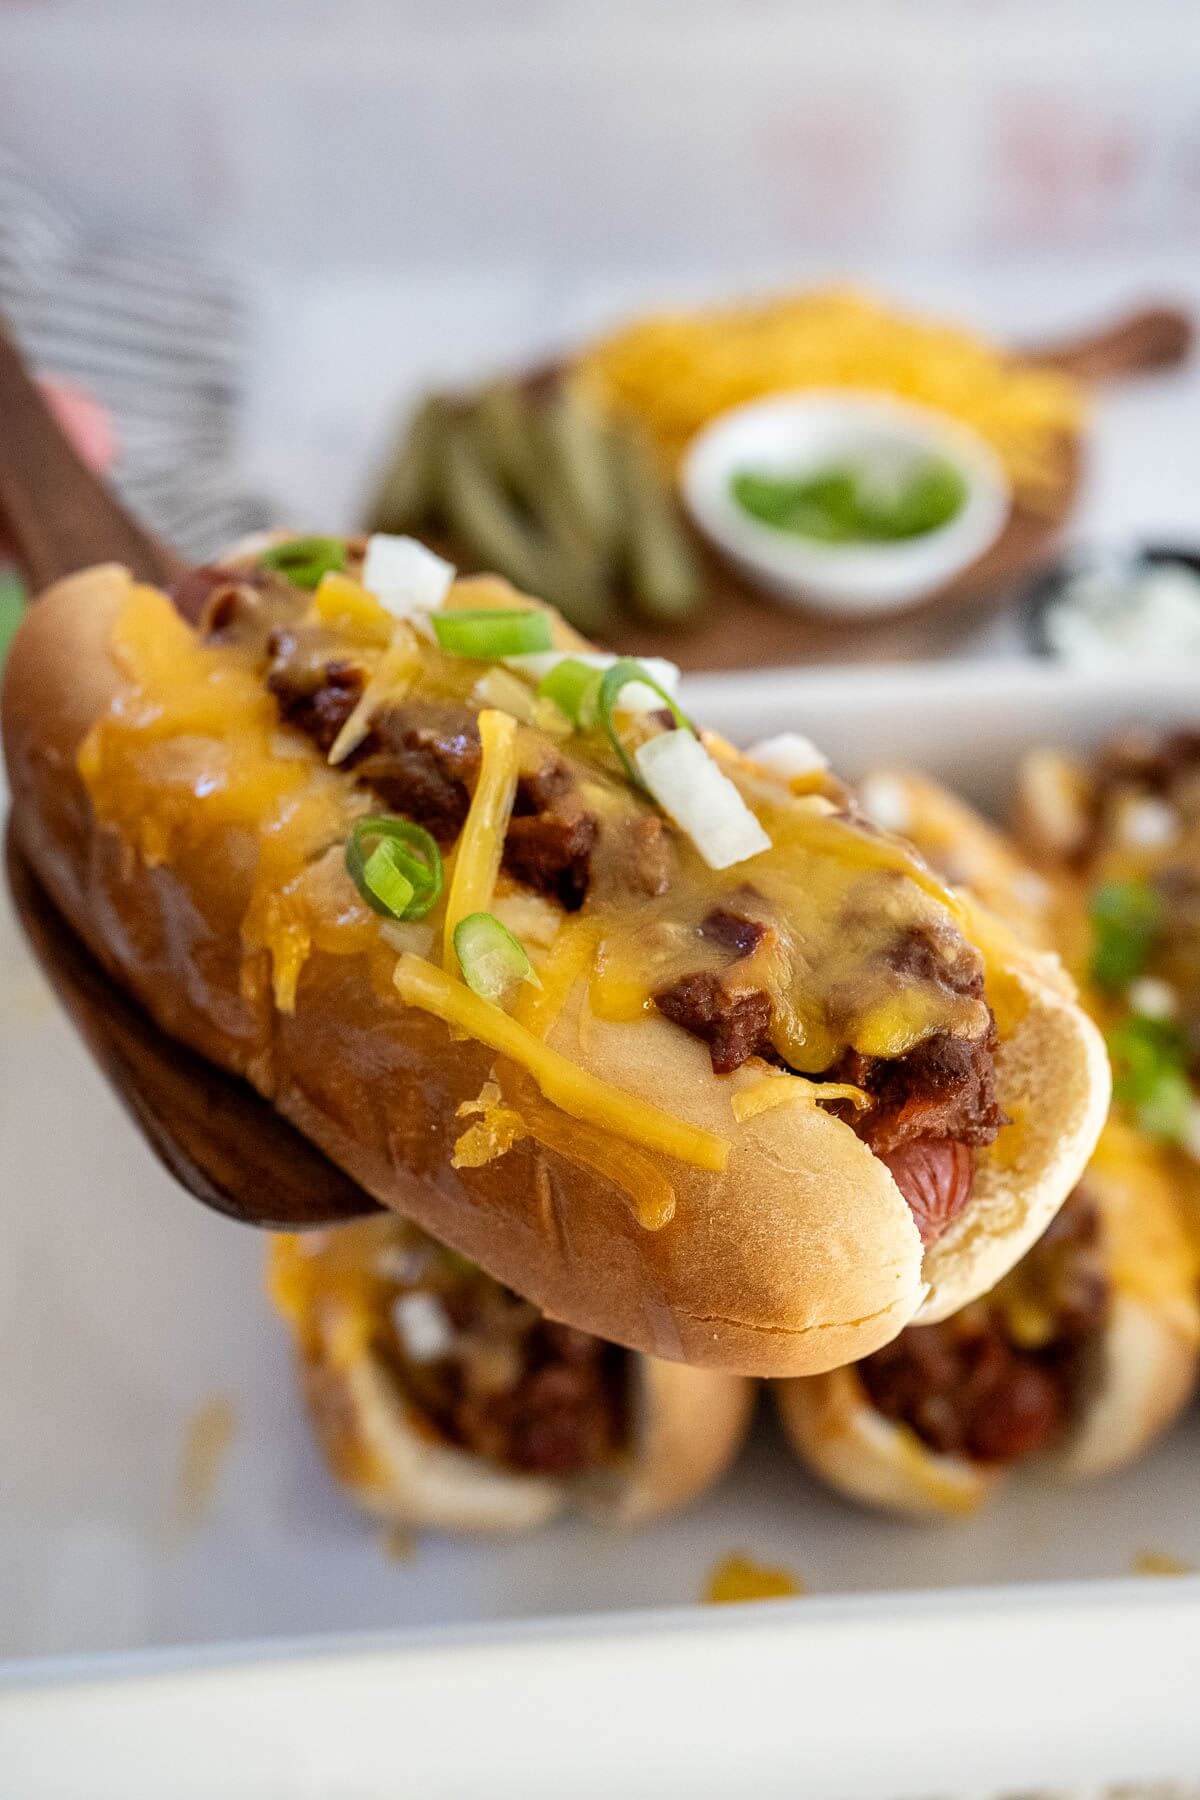 A melty, cheesy chili dog with white and green onions is lifted from the baking dish by a wooden spatula.